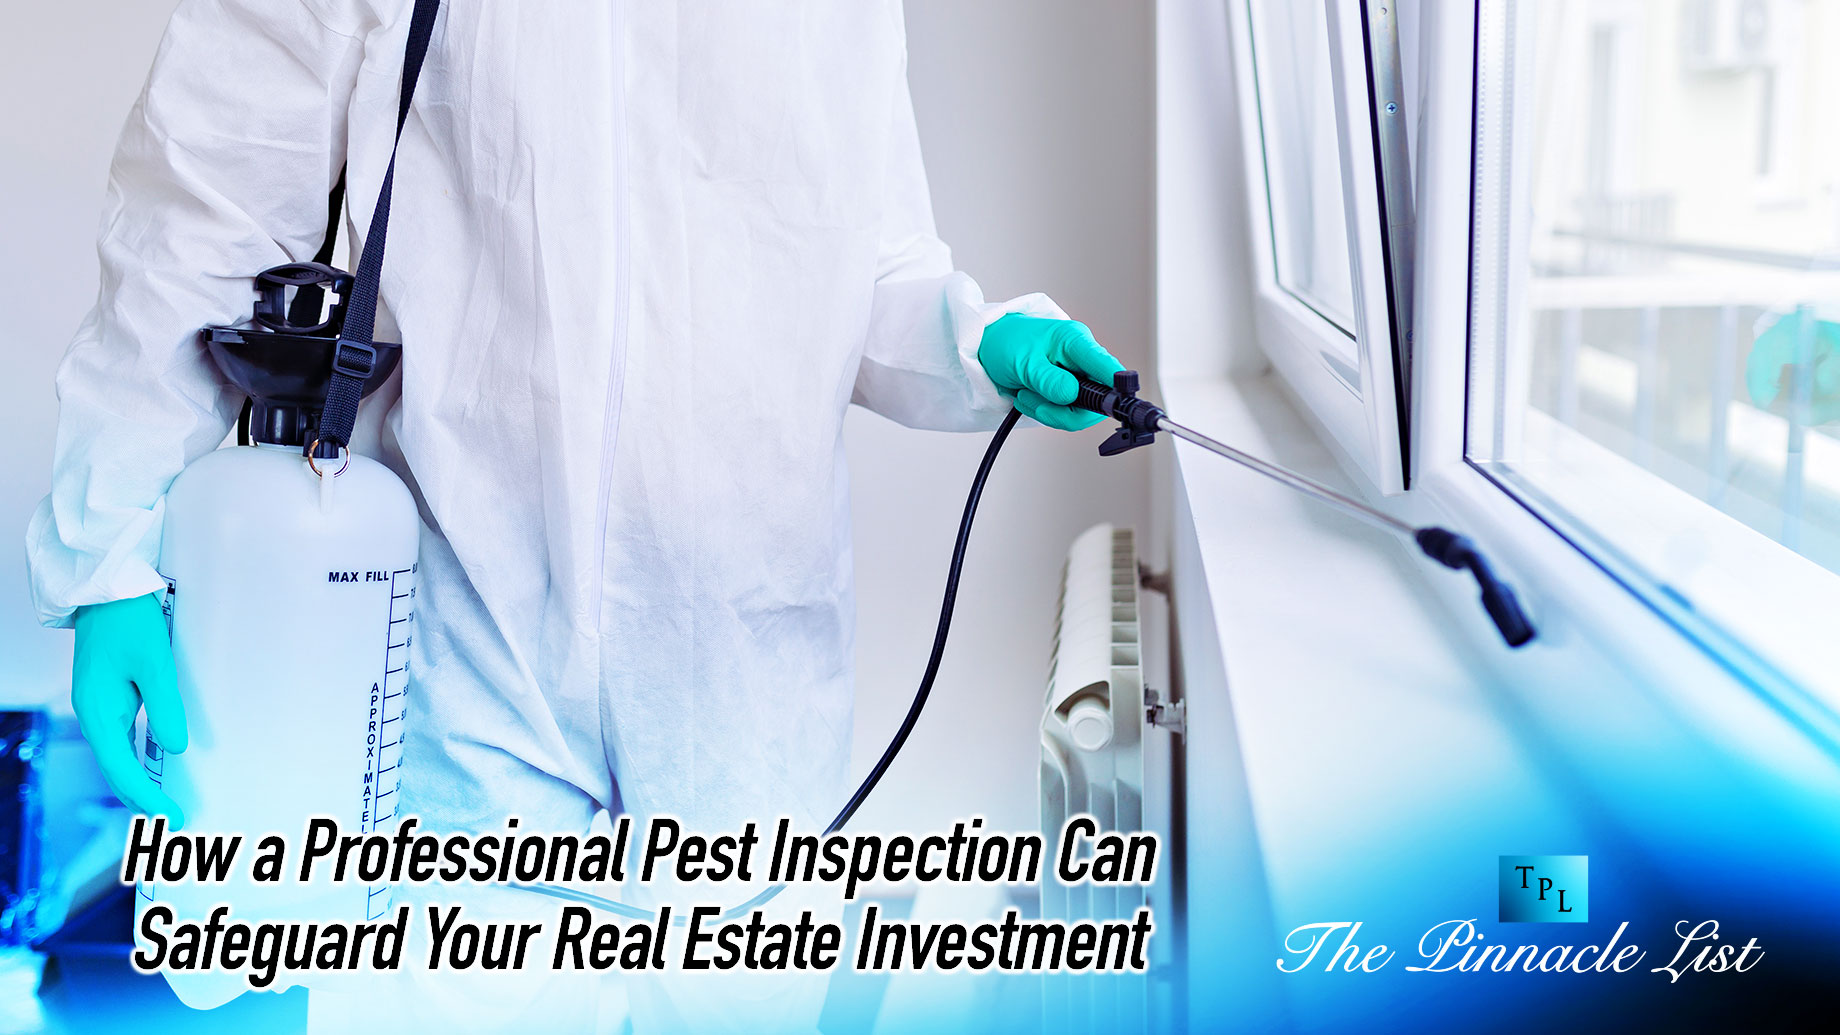 How a Professional Pest Inspection Can Safeguard Your Real Estate Investment